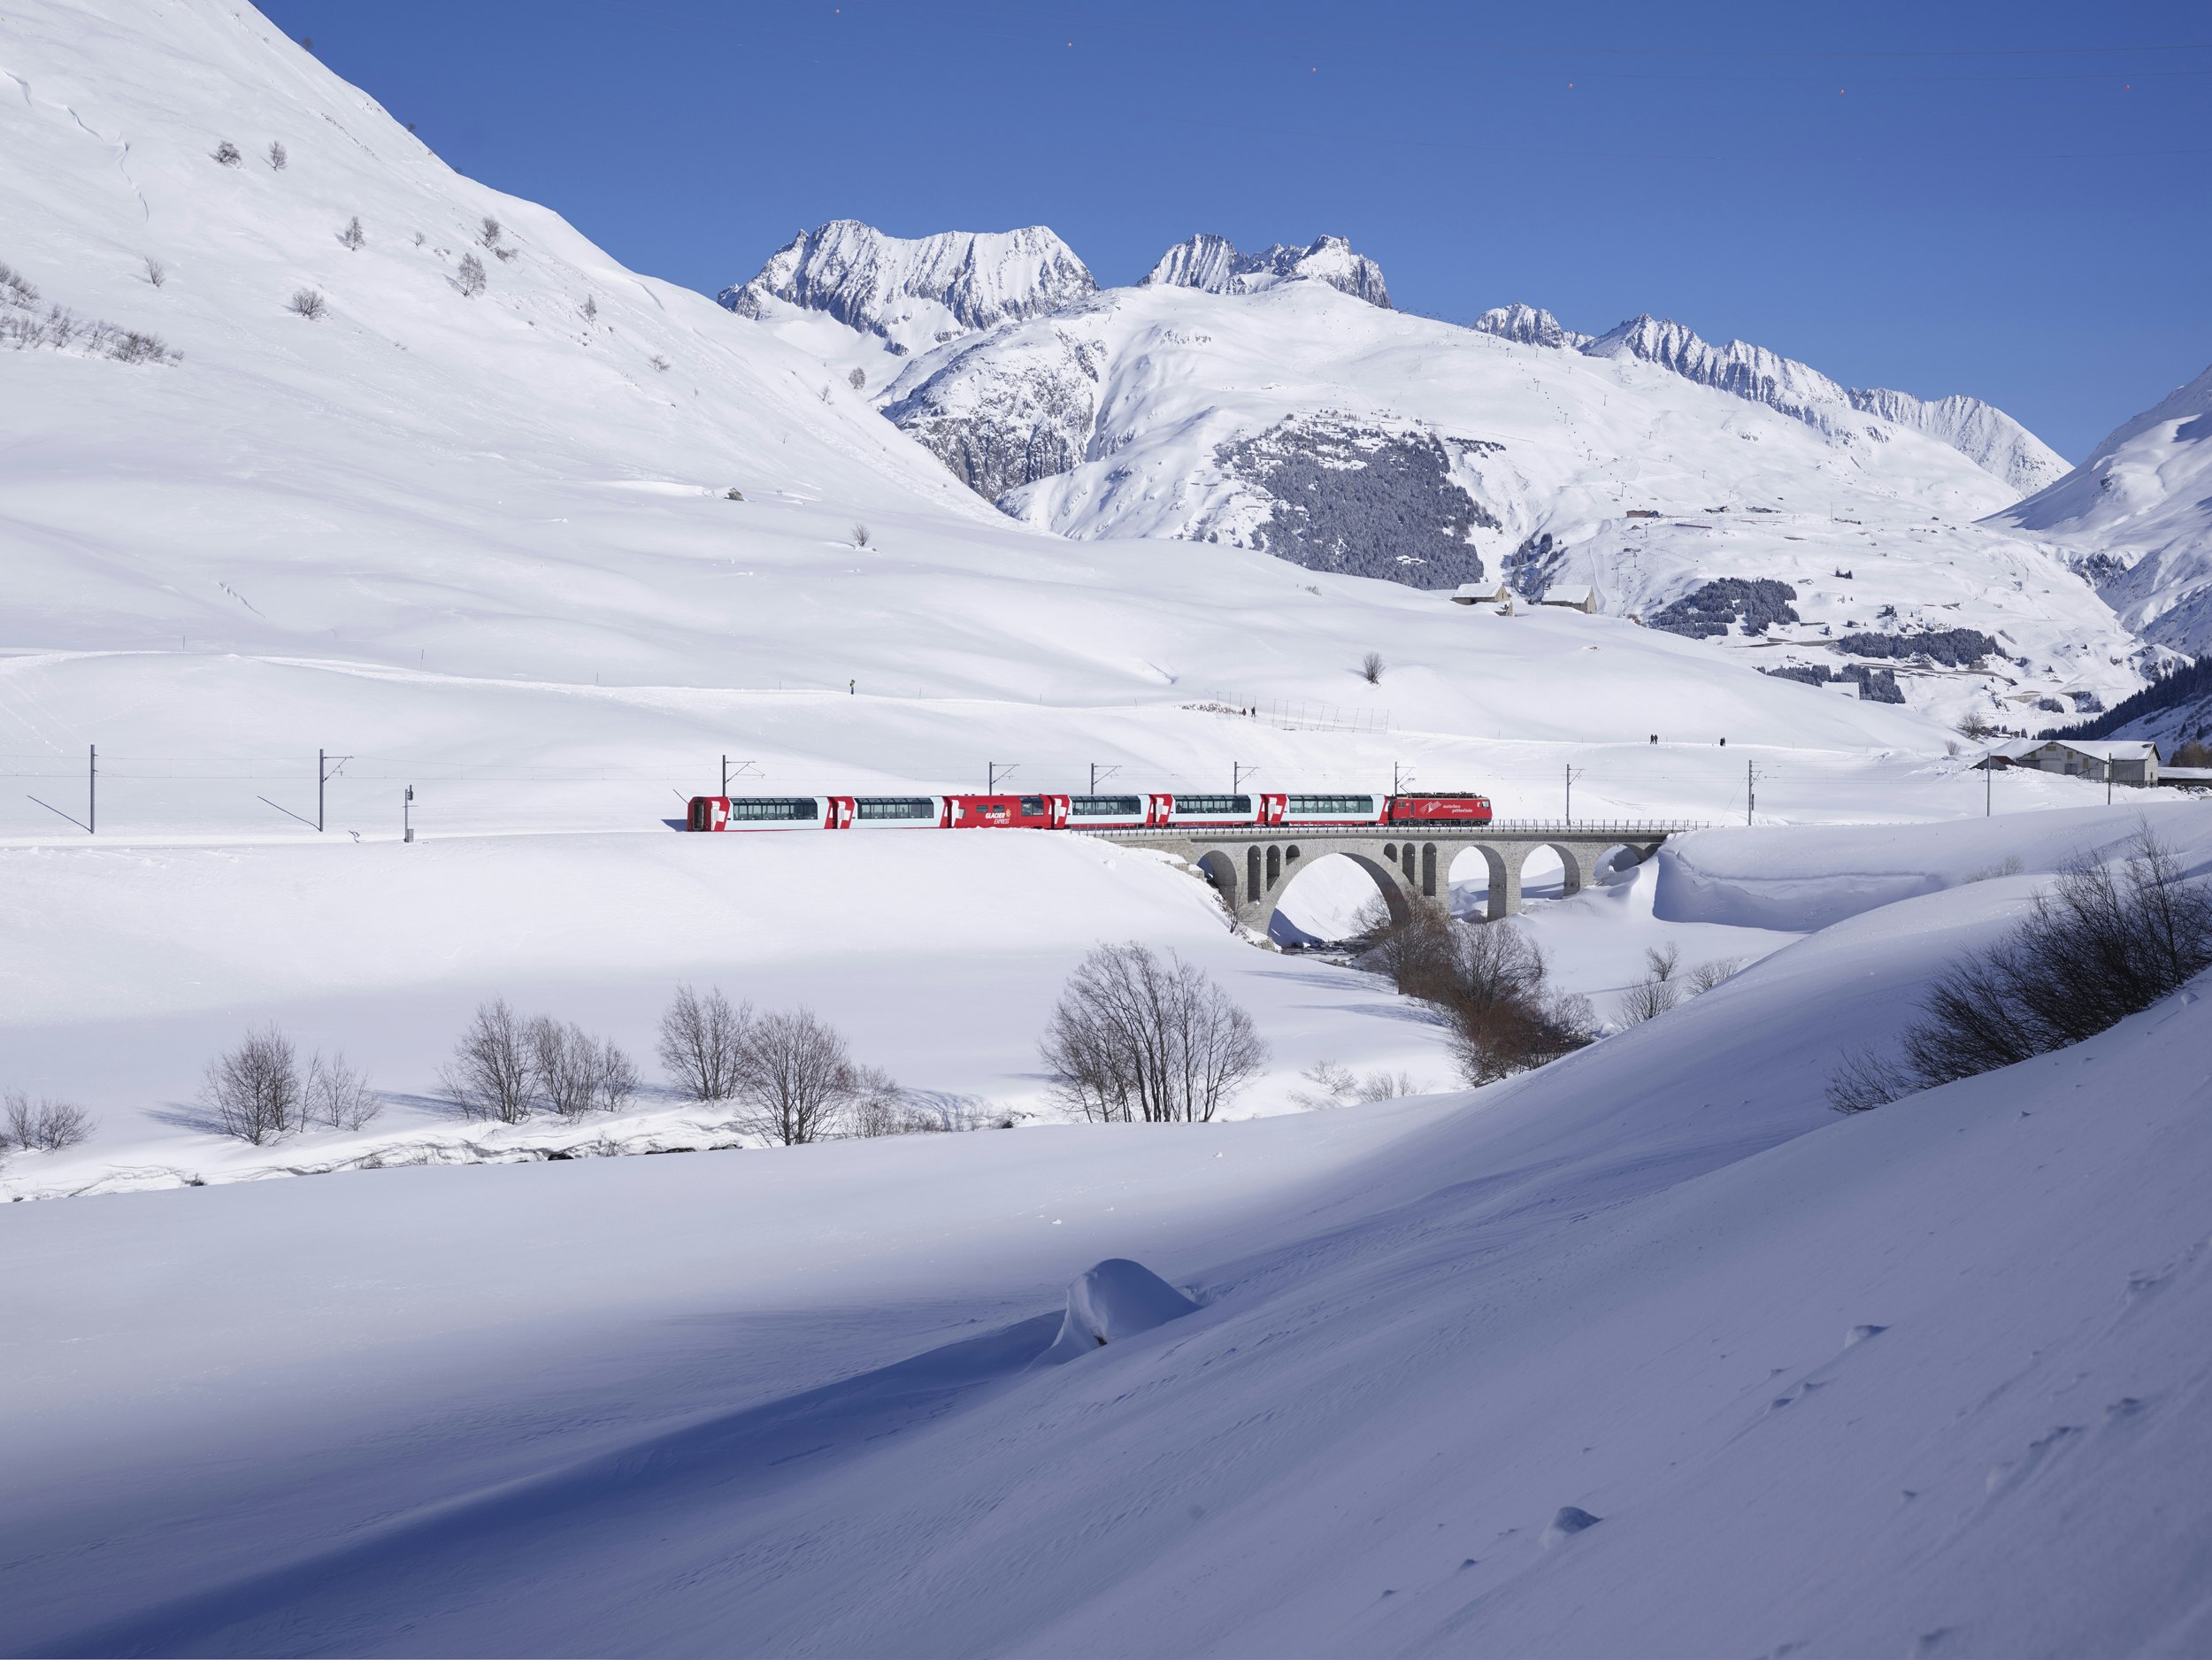 Glacier Express short trip<br>2 days / 1 night<br>from CHF 775.- for 2 persons